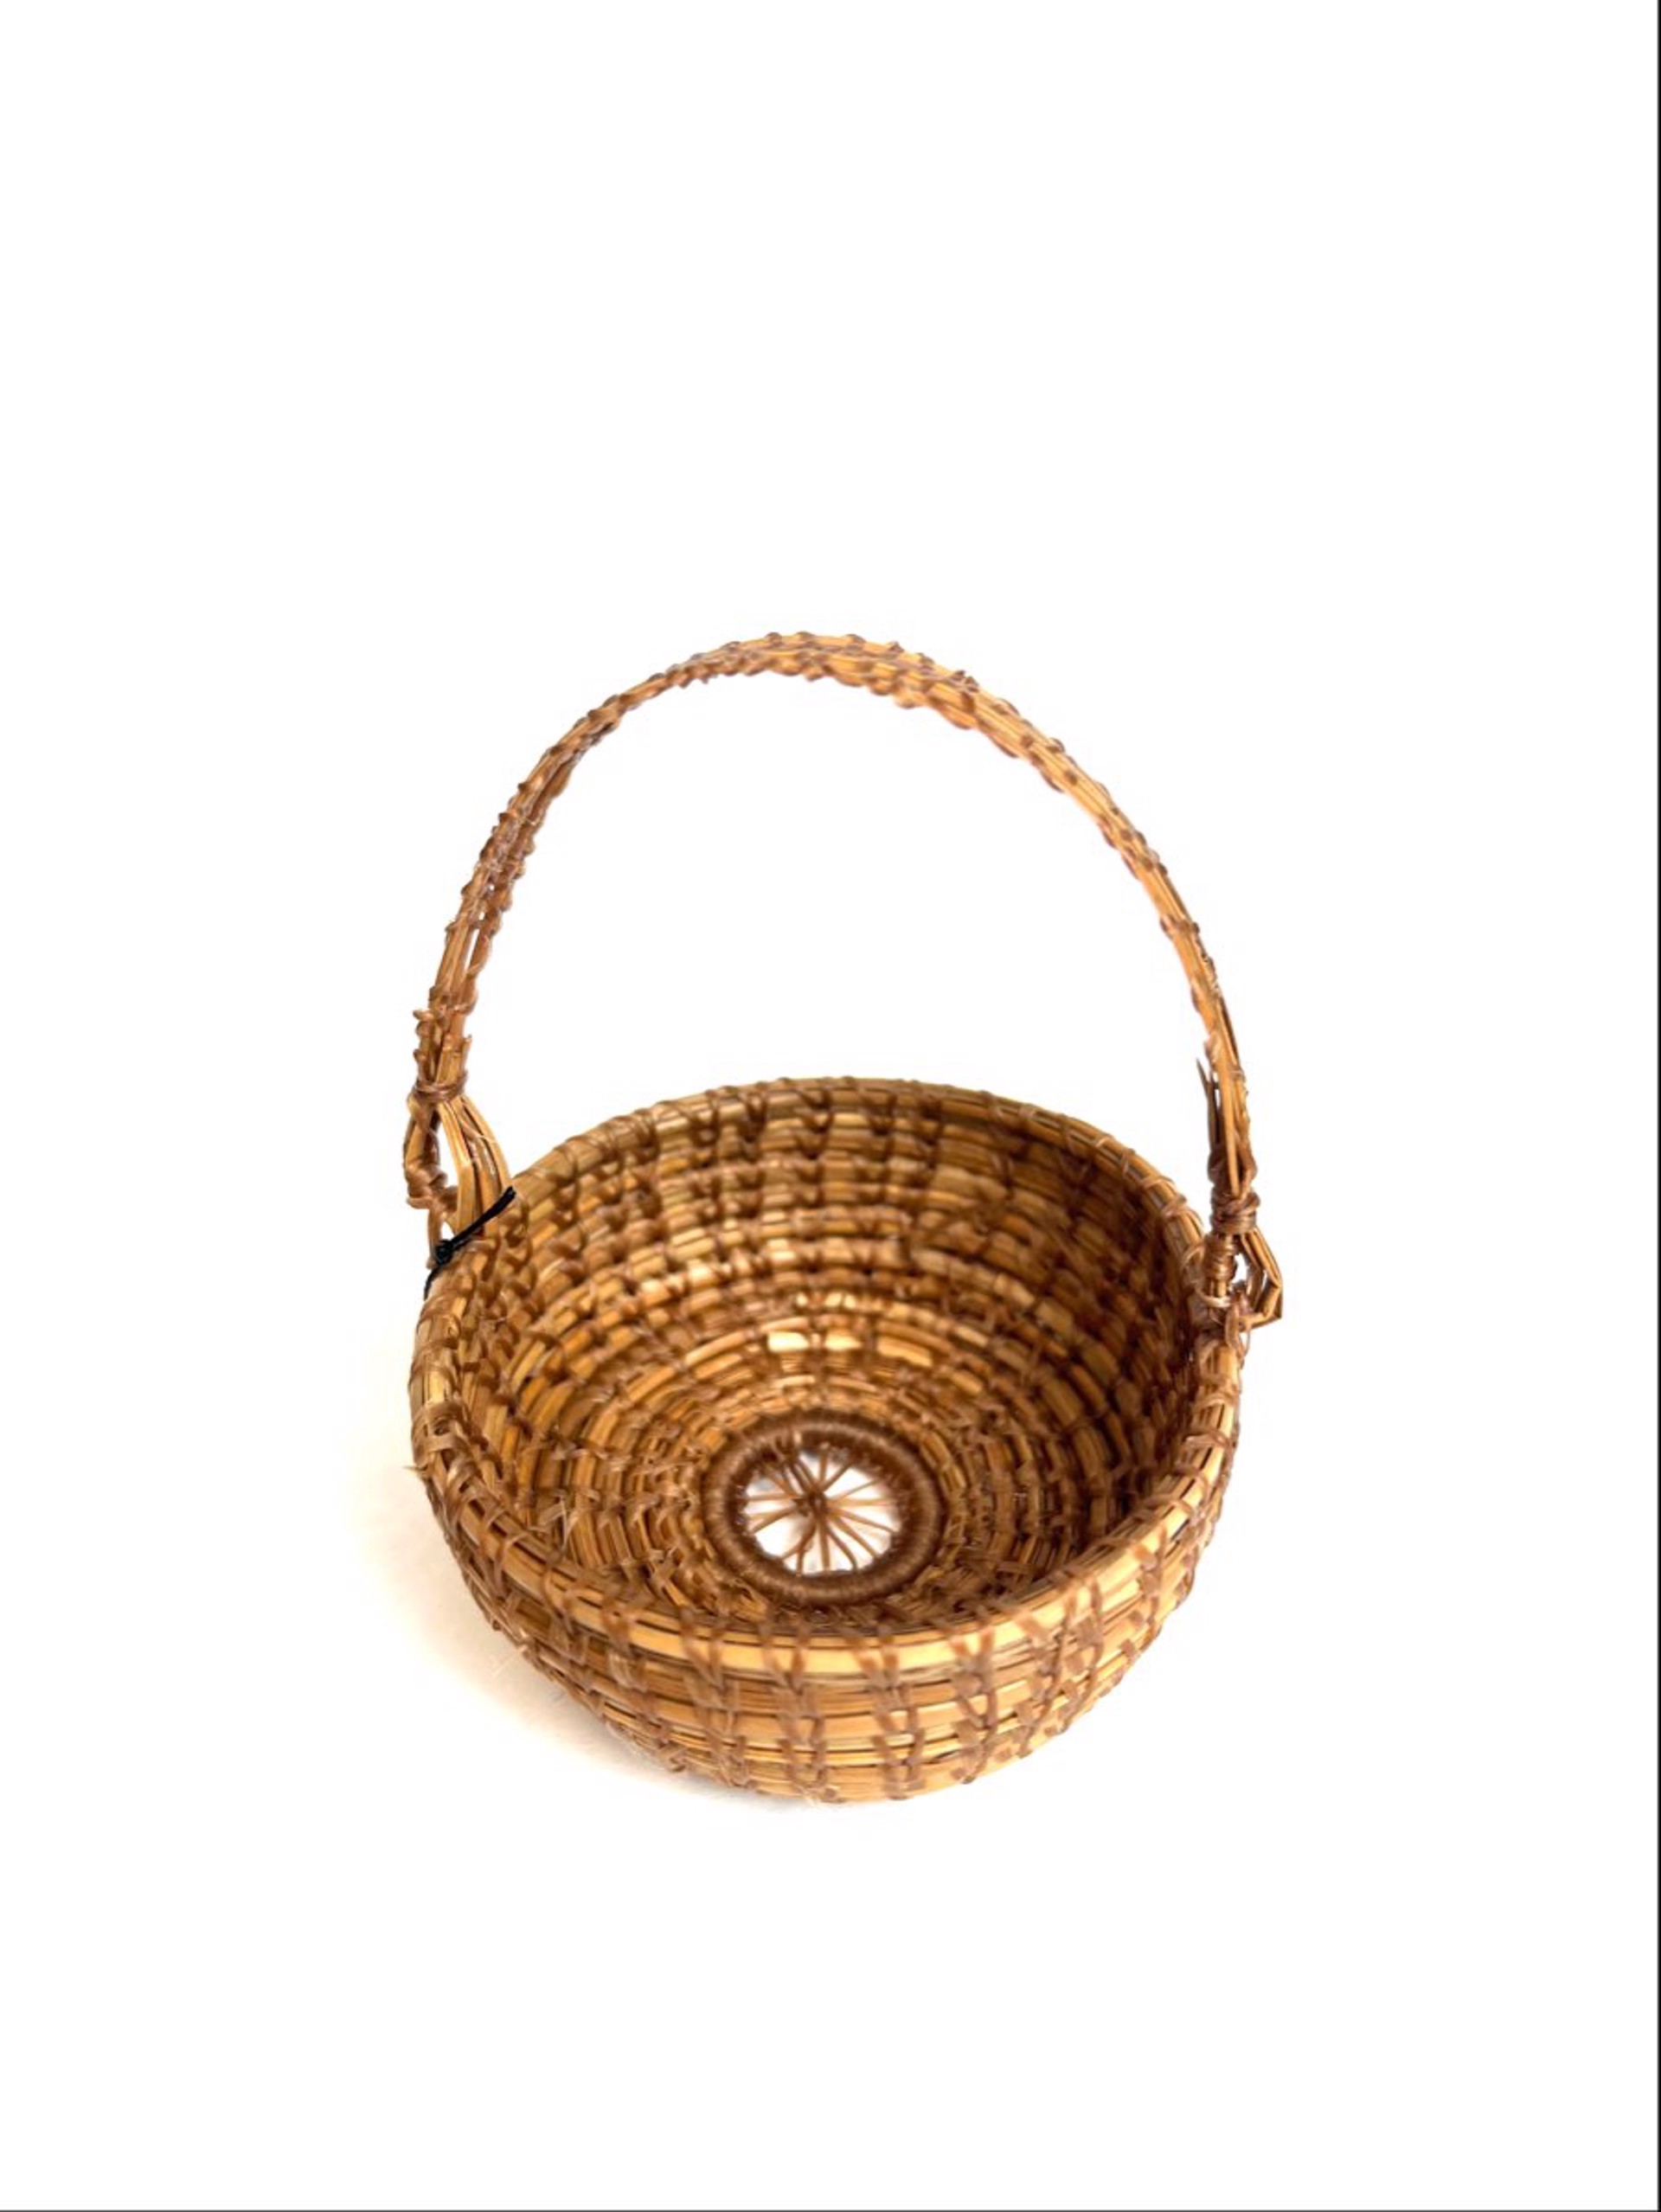 Basket with Flower Design and Swing Handle by Jacqueline Green